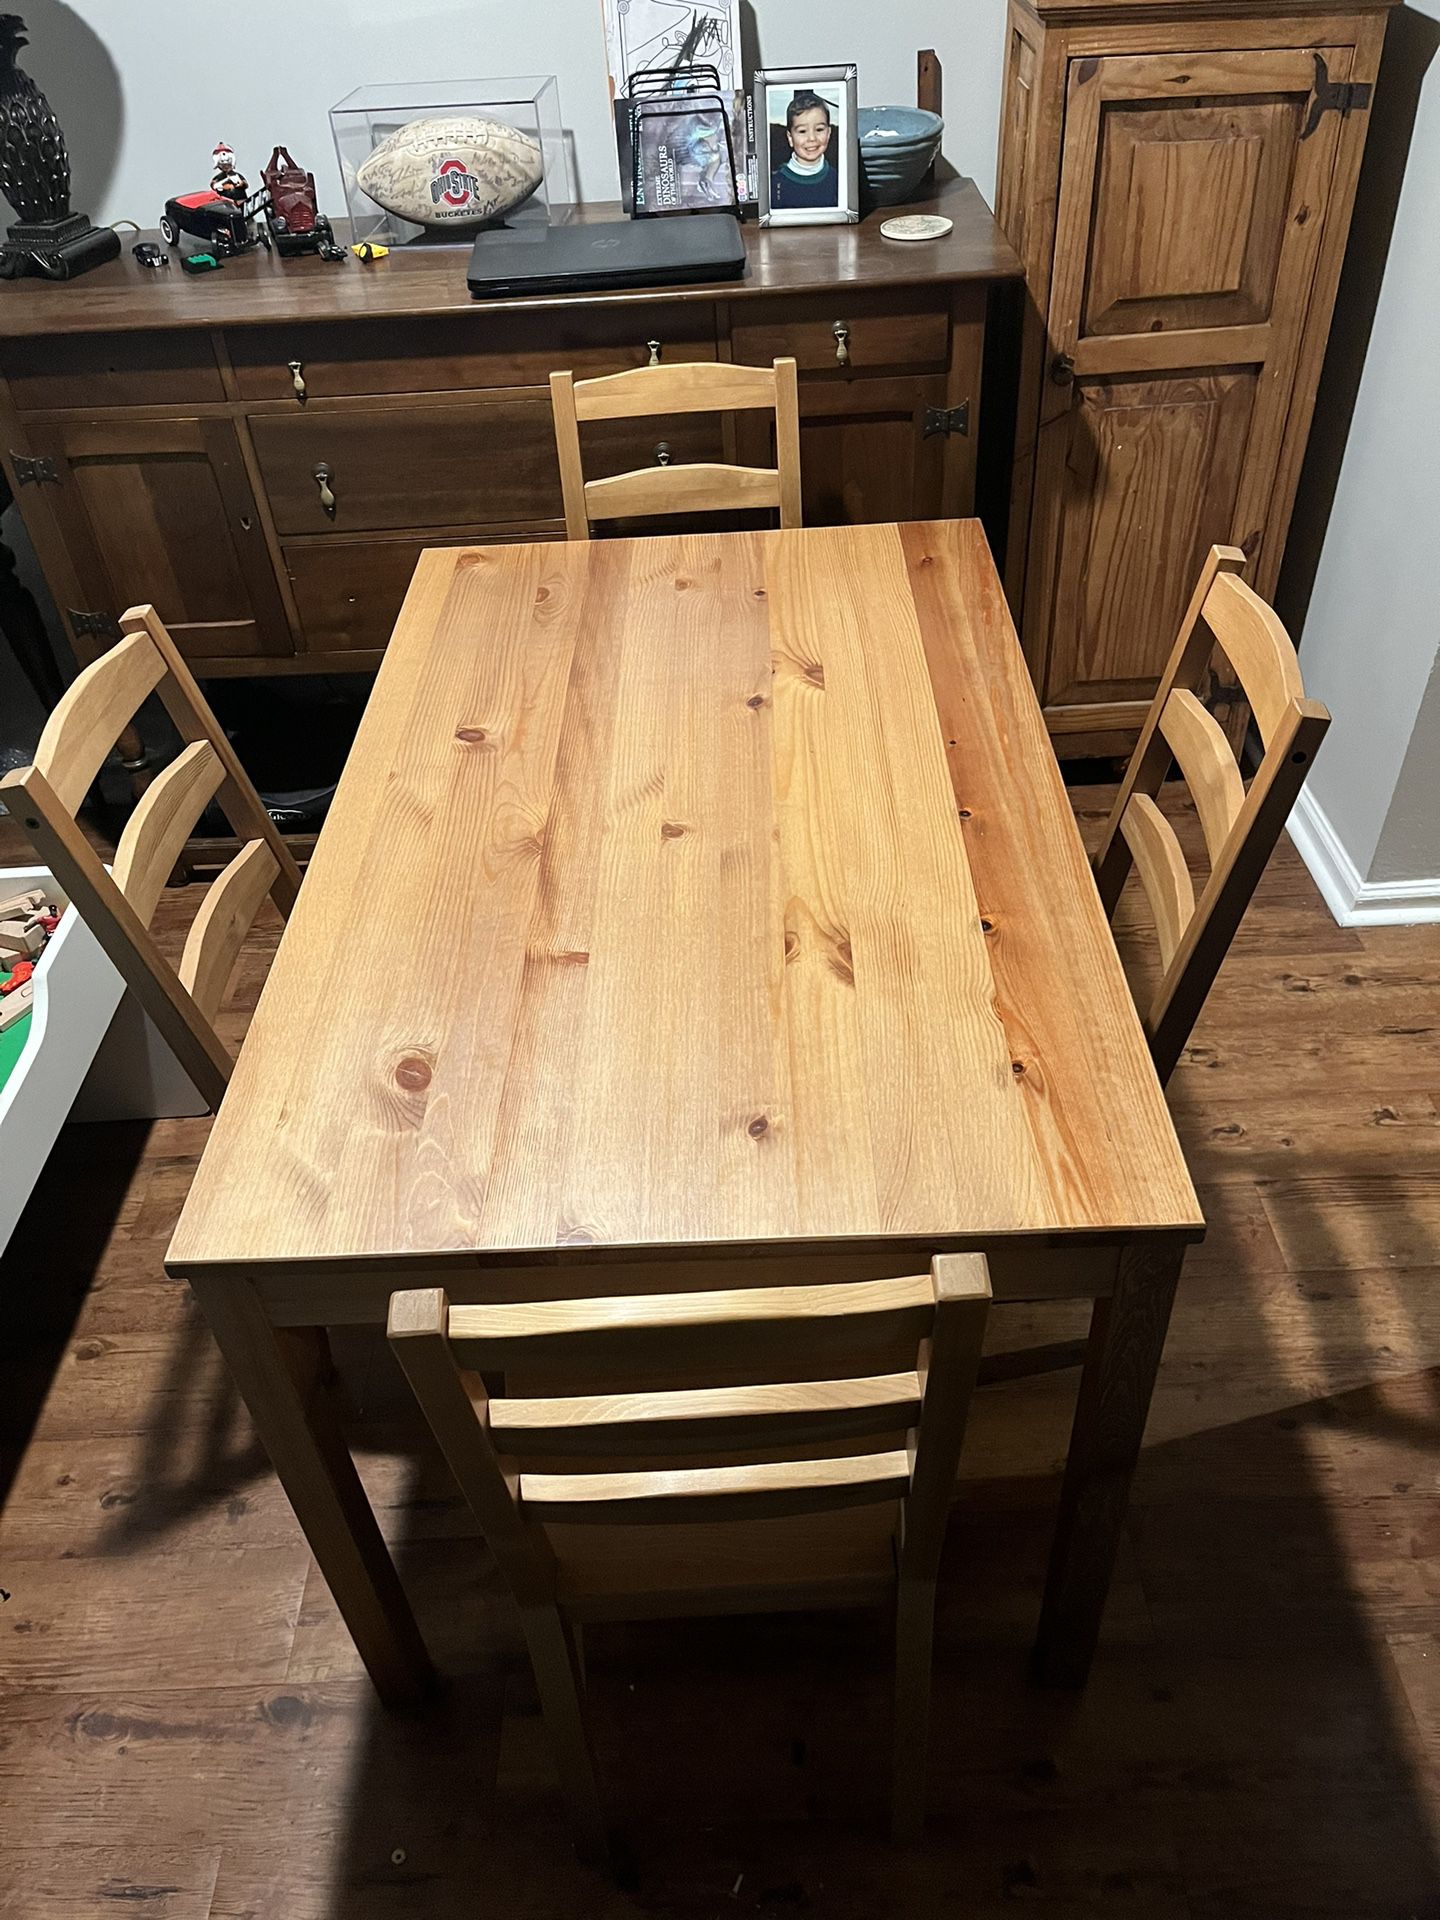 IKEA Dining Room Table 4 Chairs